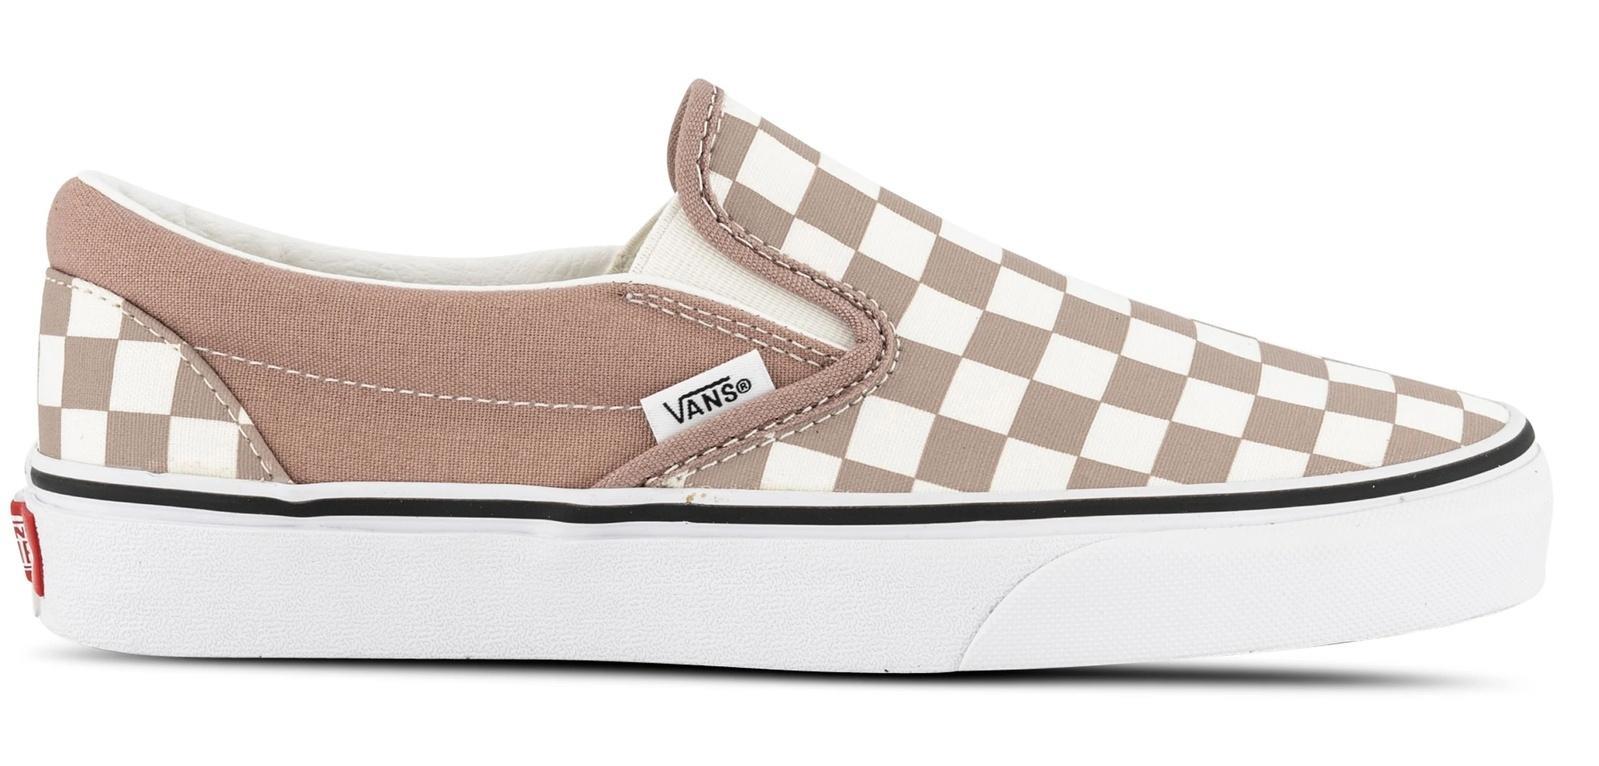 Vans Classic Slip On Canvas Sneaker Shoes Chess Check - Etherea/True White - US 9